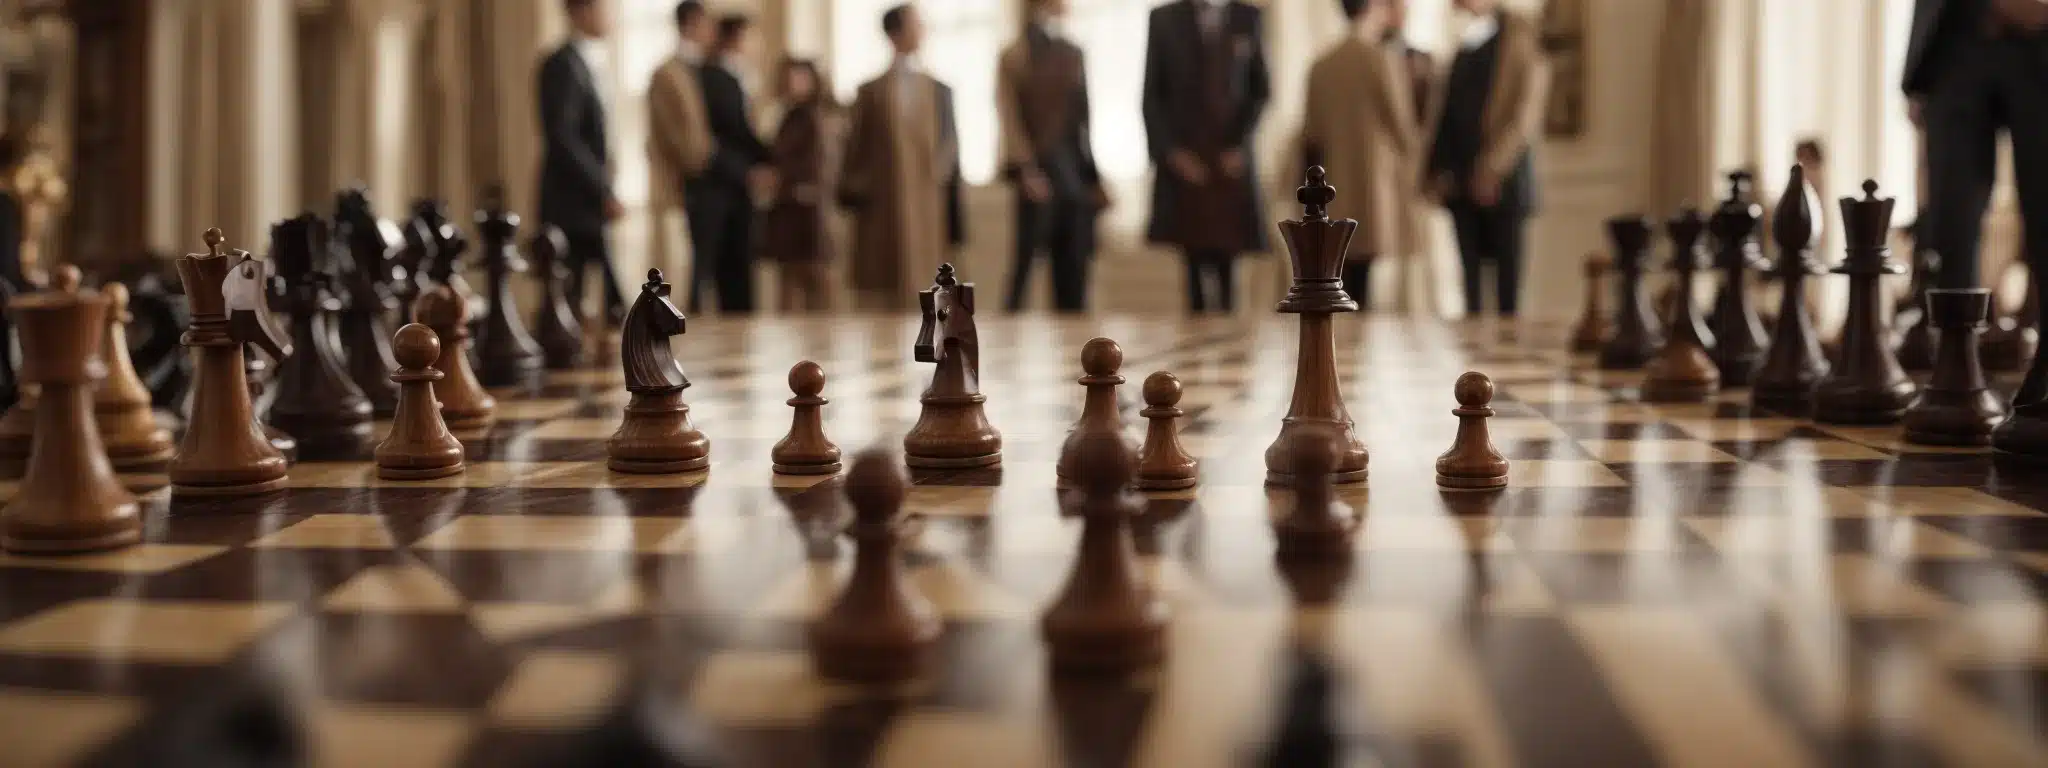 A Chessboard With One Distinguished King Piece Larger Than The Others, Surrounded By Blurred Figures Symbolic Of Competitors.